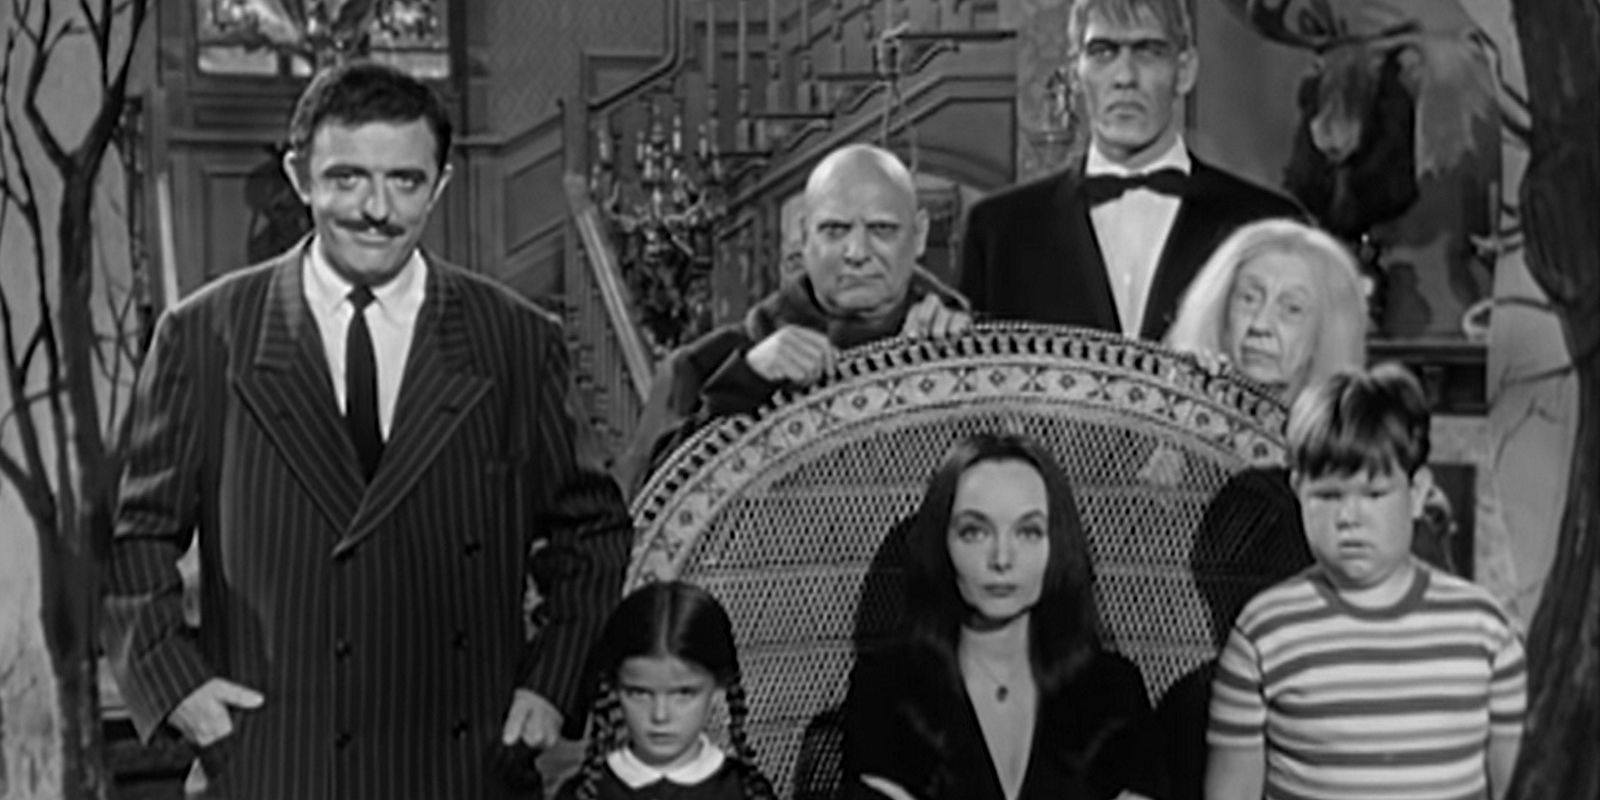 The cast of the Addams Family 1964 gathered around a chair